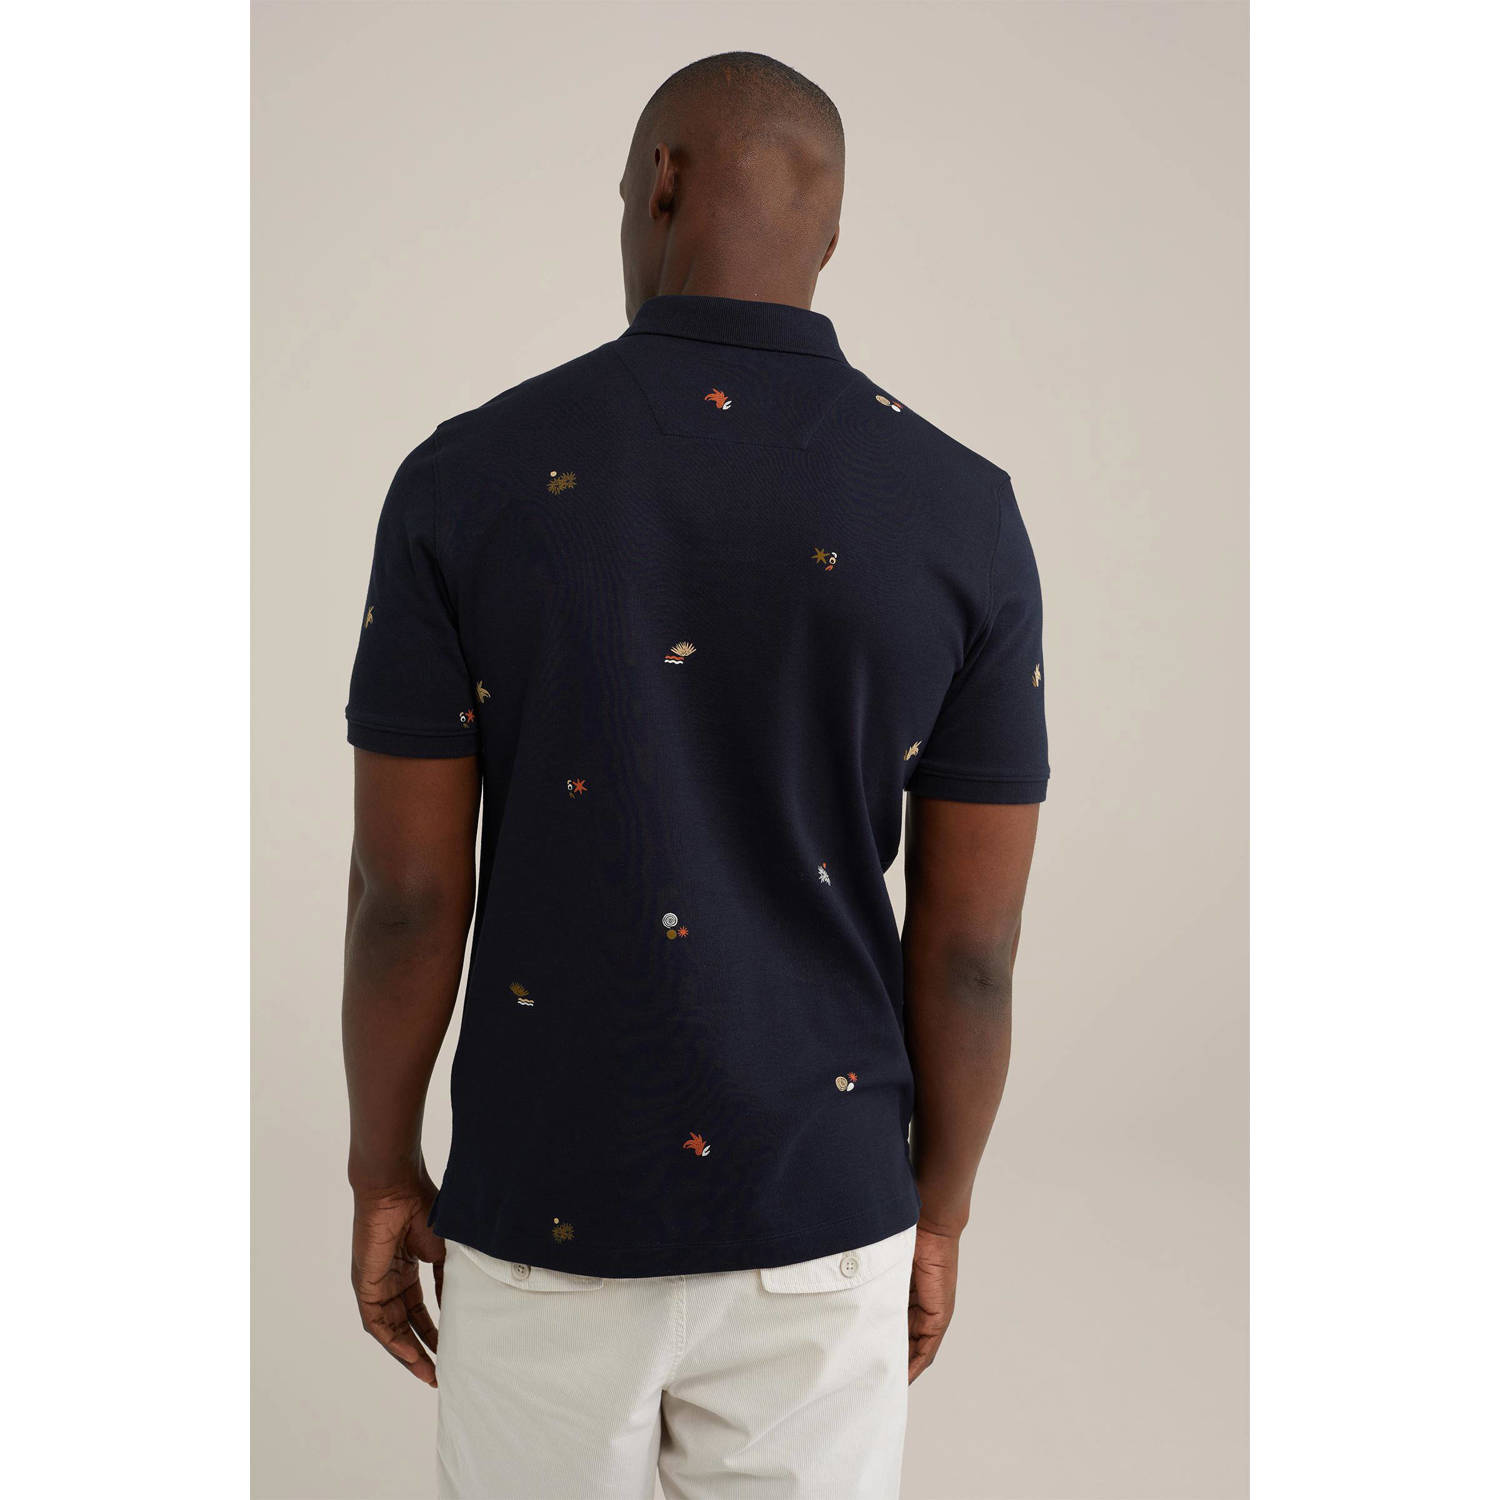 WE Fashion polo met all over print heavy blue